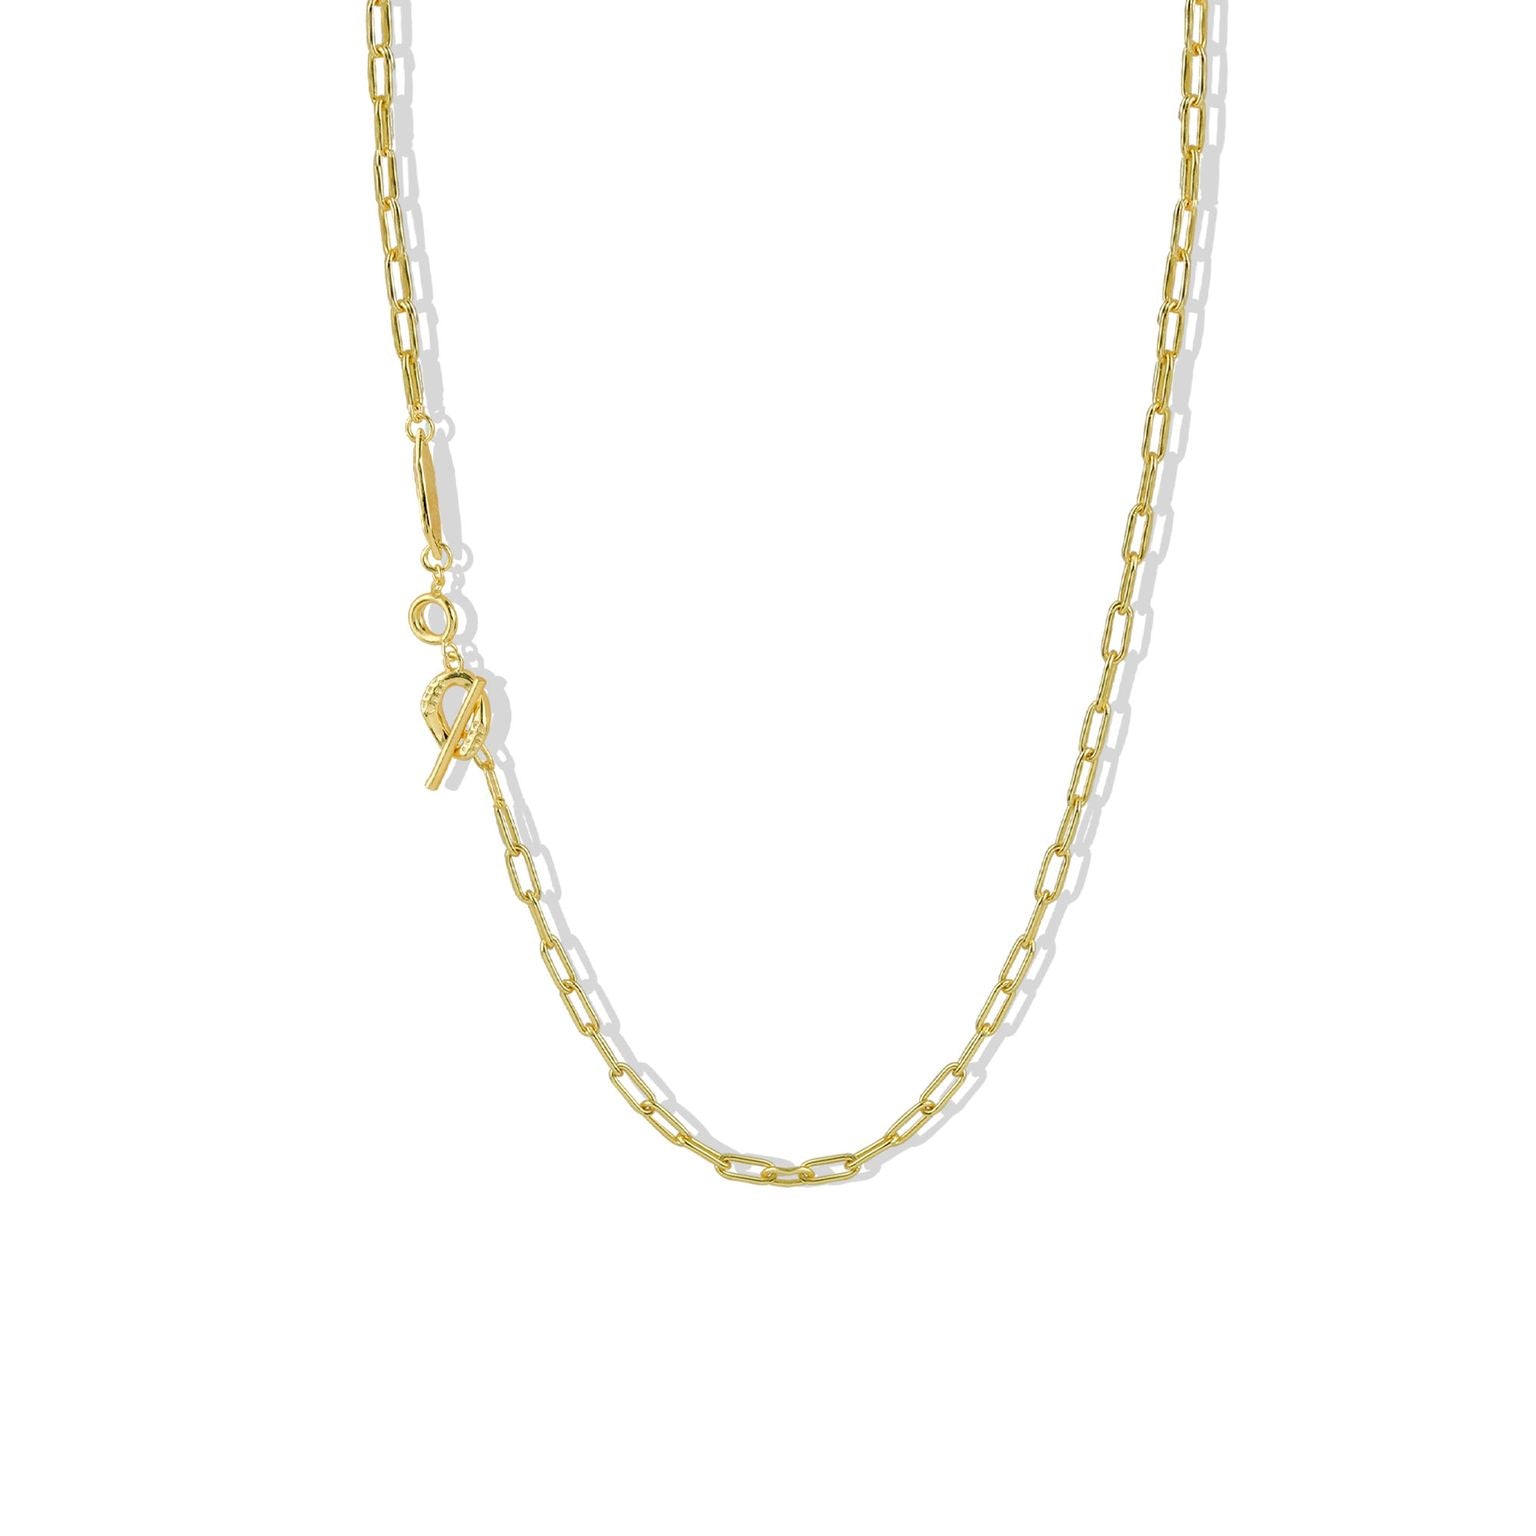 THE OPEN STATION TOGGLE NECKLACE